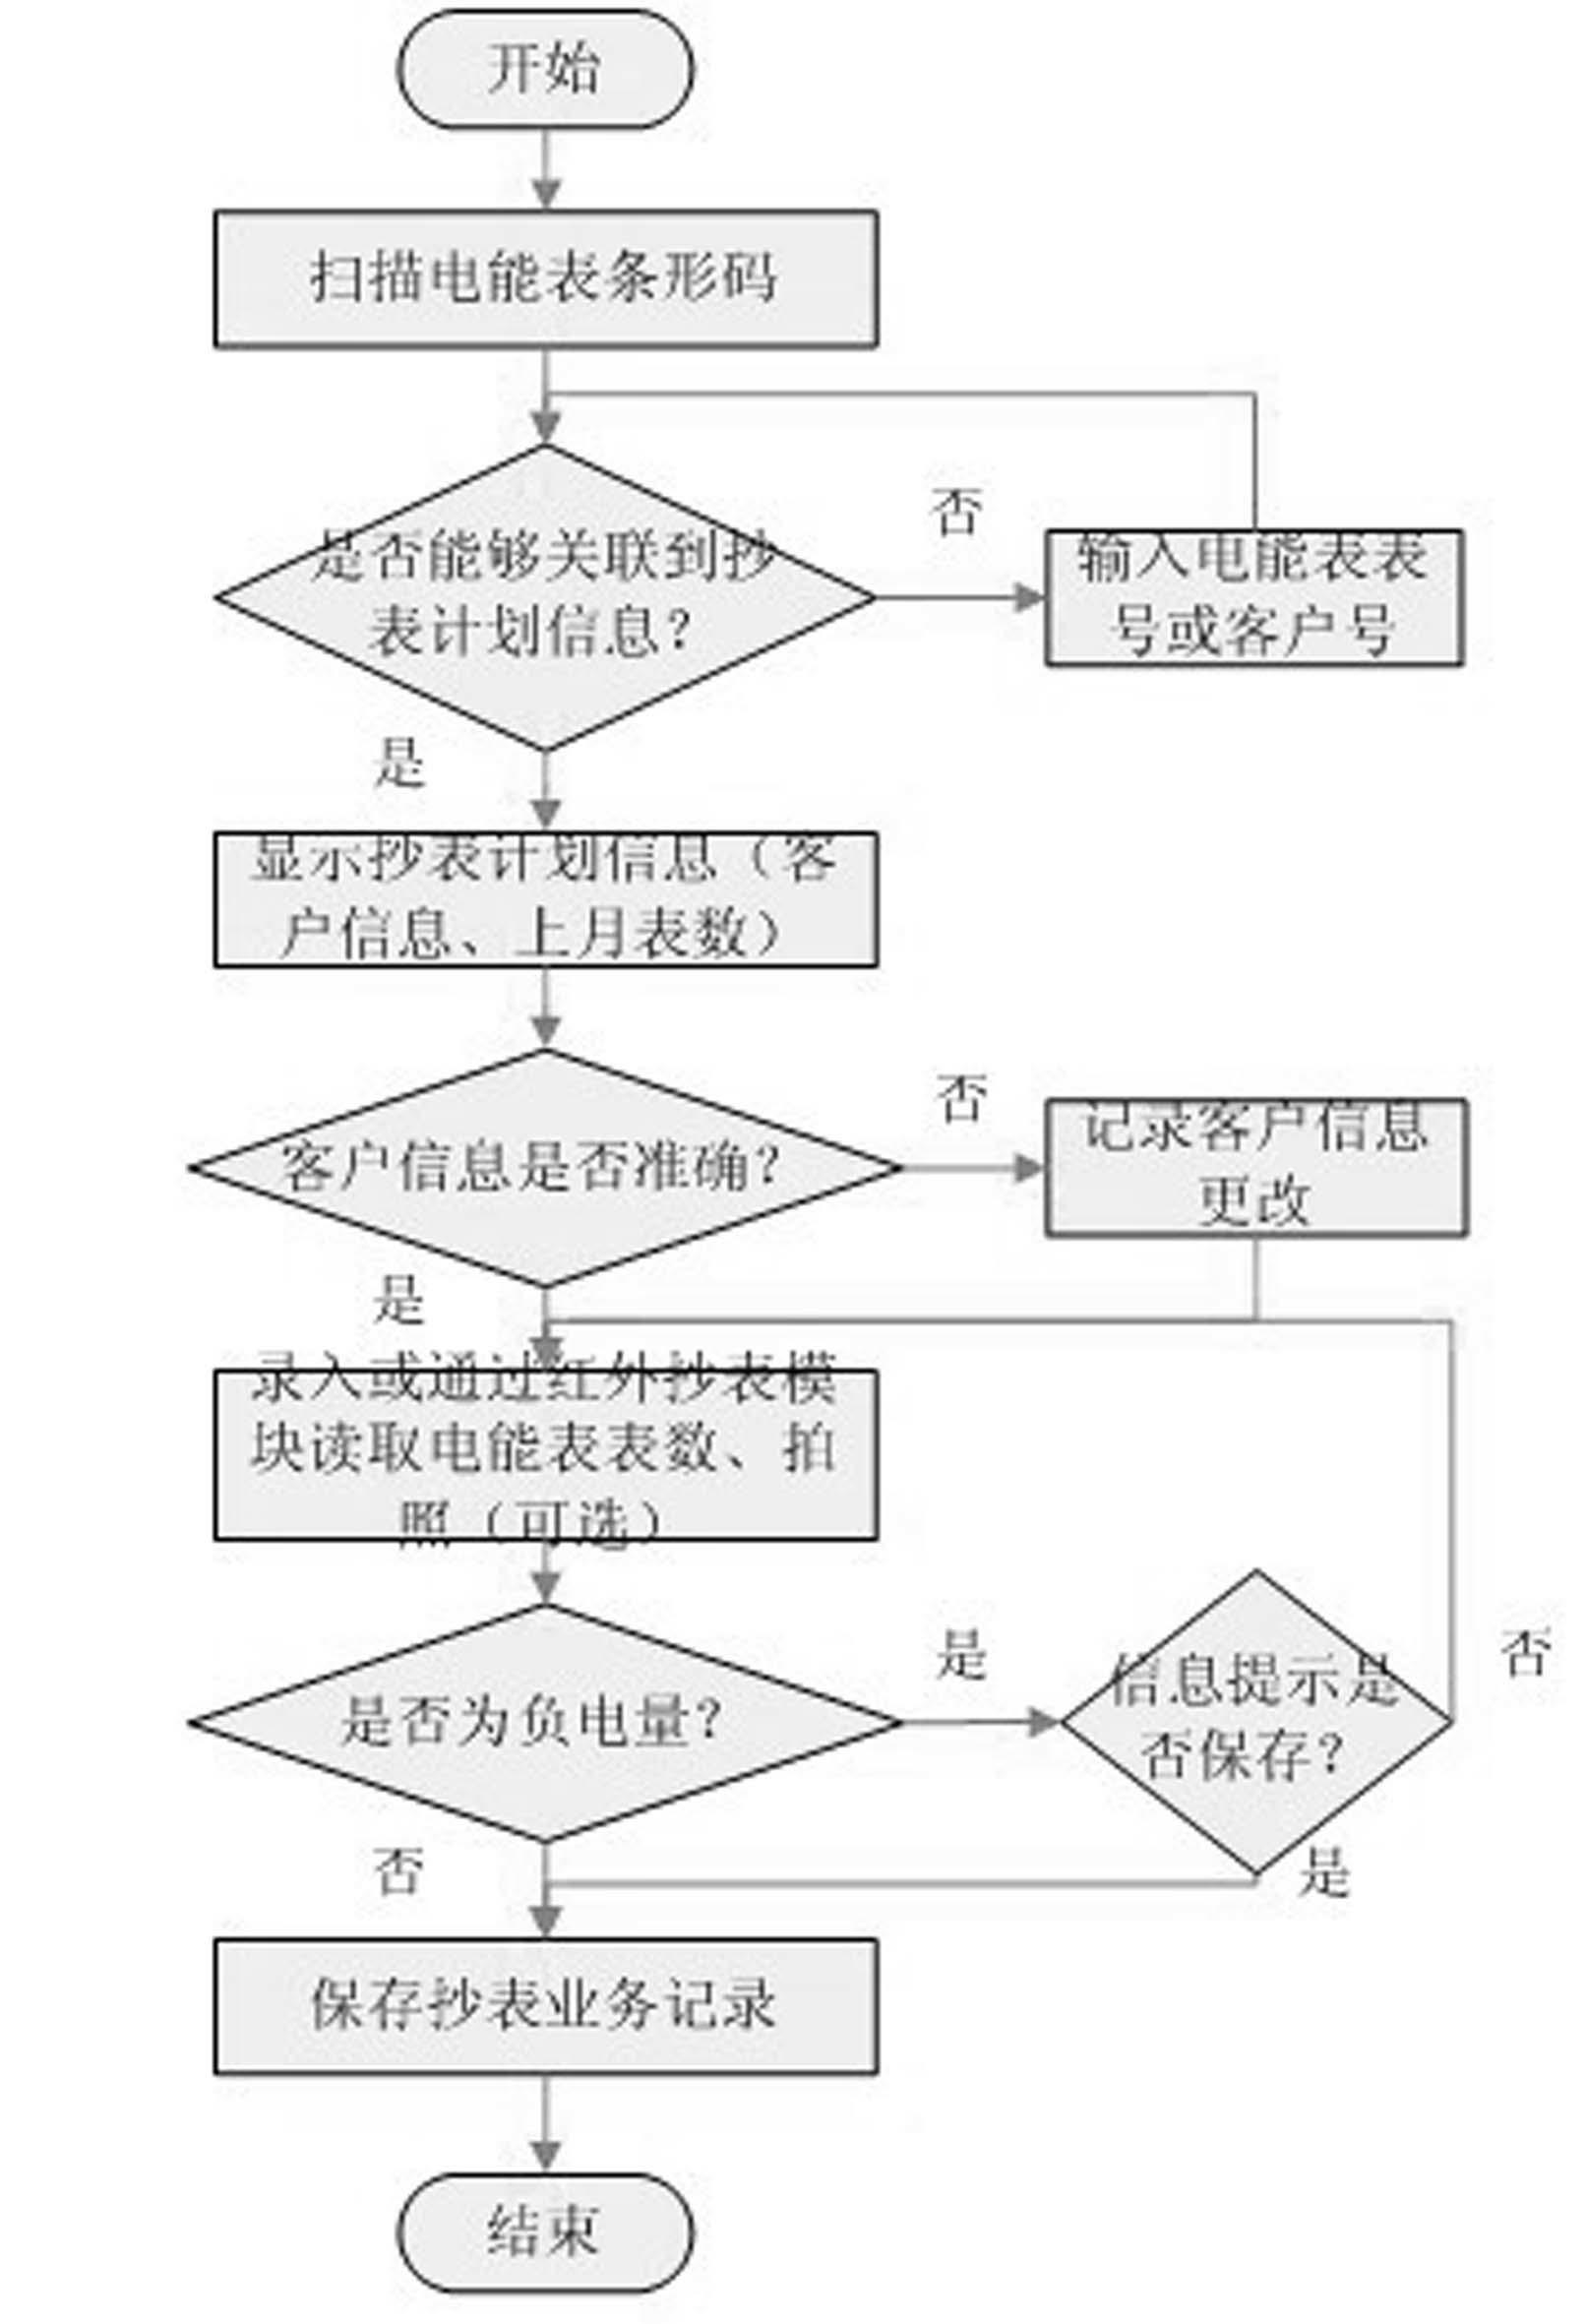 Method for processing flow and standard of power-marketing site services on basis of handheld terminal